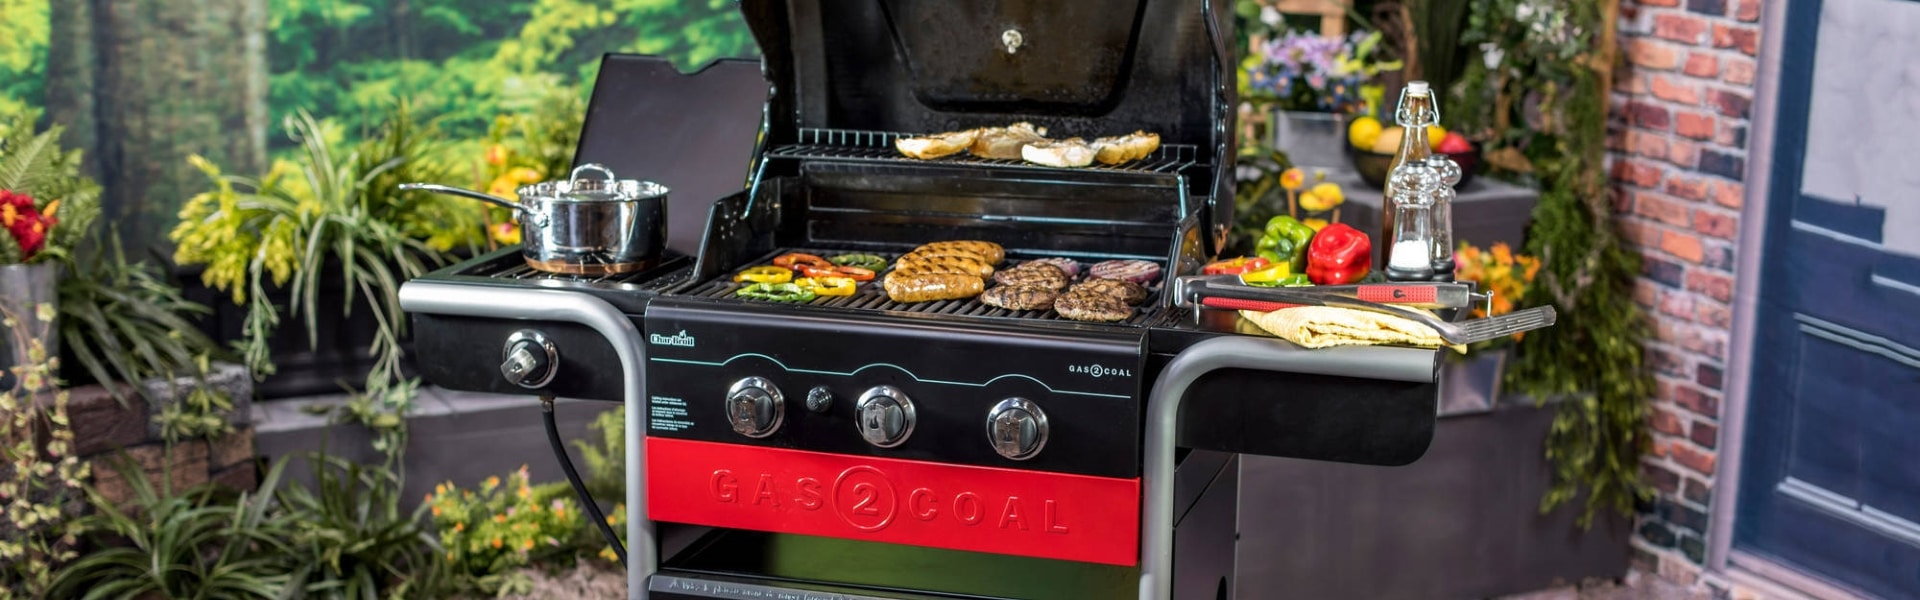 Best Gas Grills to Buy at Home Depot - Consumer Reports